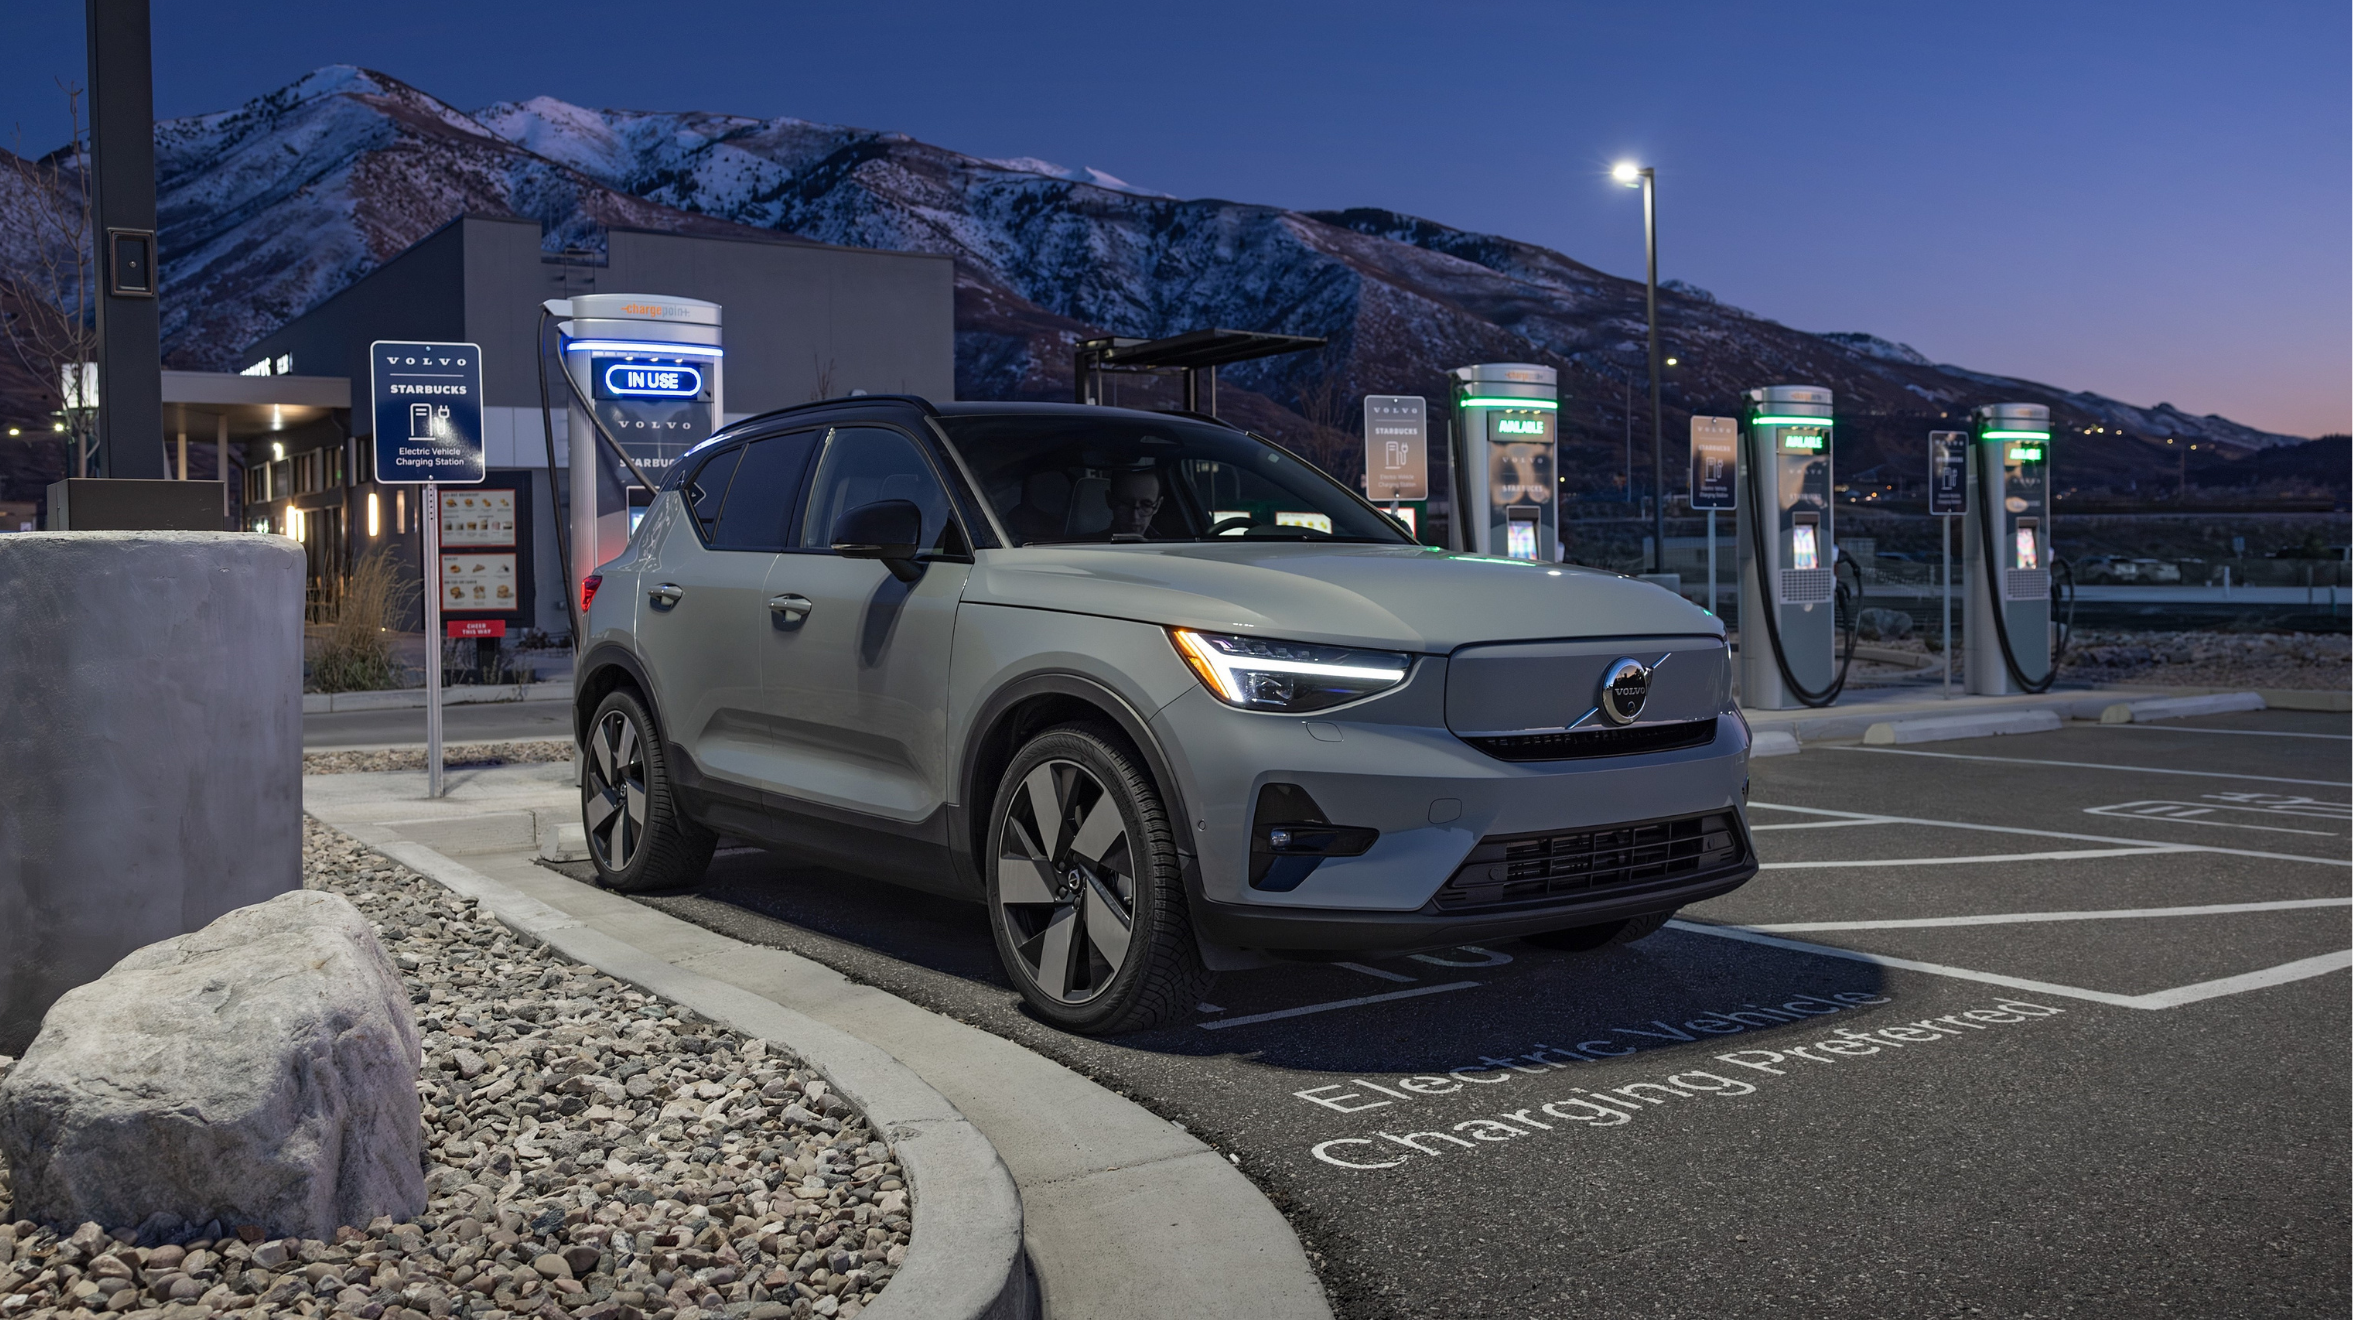 An electric Volvo vehicle sits in the parking lot of a Starbucks store connected to an electric vehicle charger